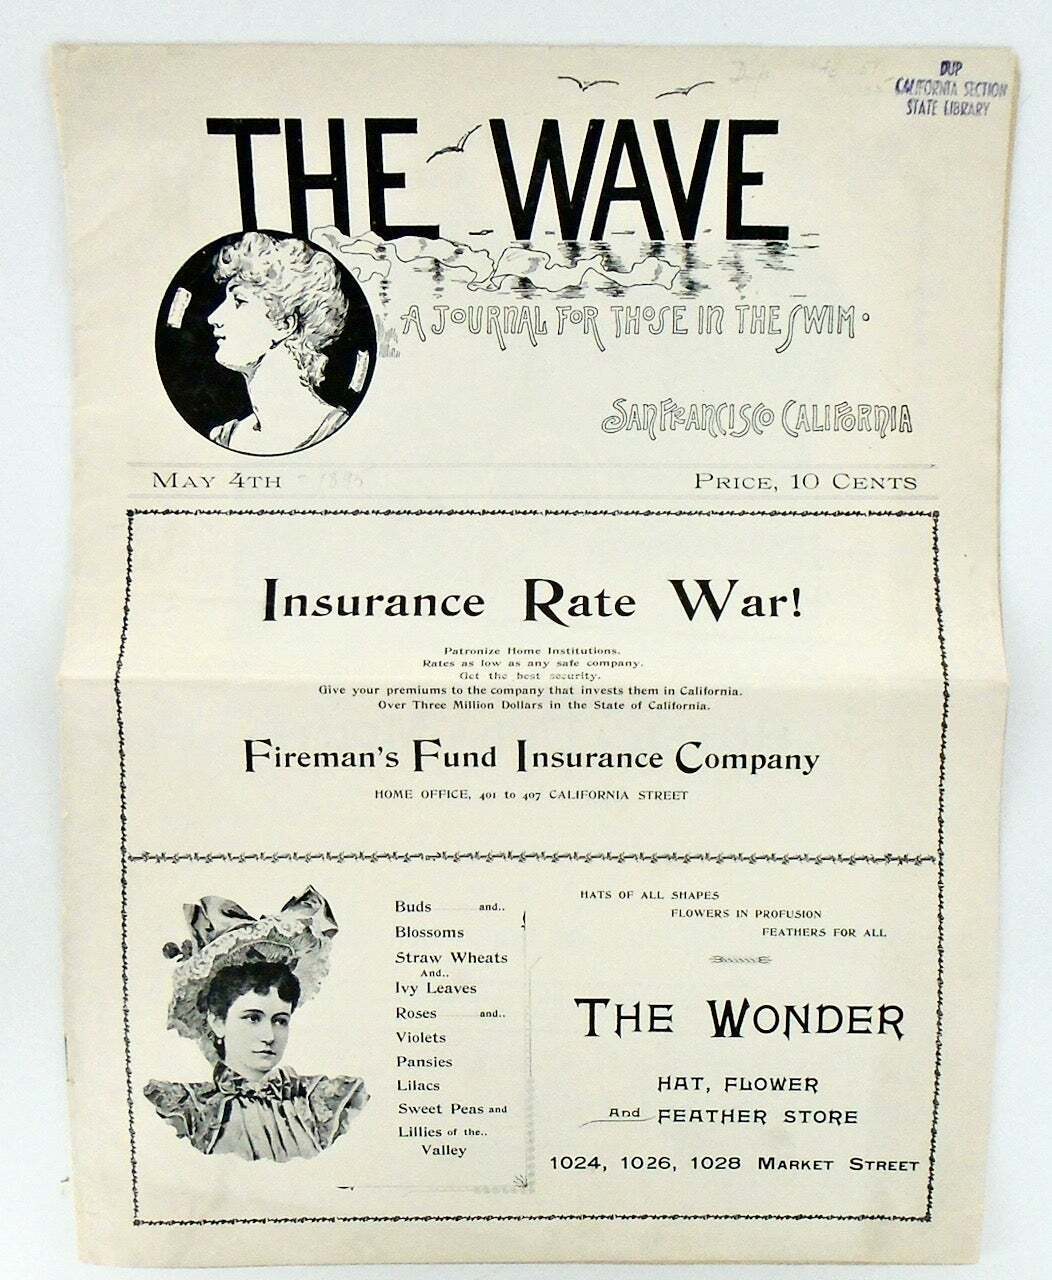 1895 THE WAVE MAGAZIINE A JOURNAL FOR THOSE IN THE SWIM / May 4, 1895